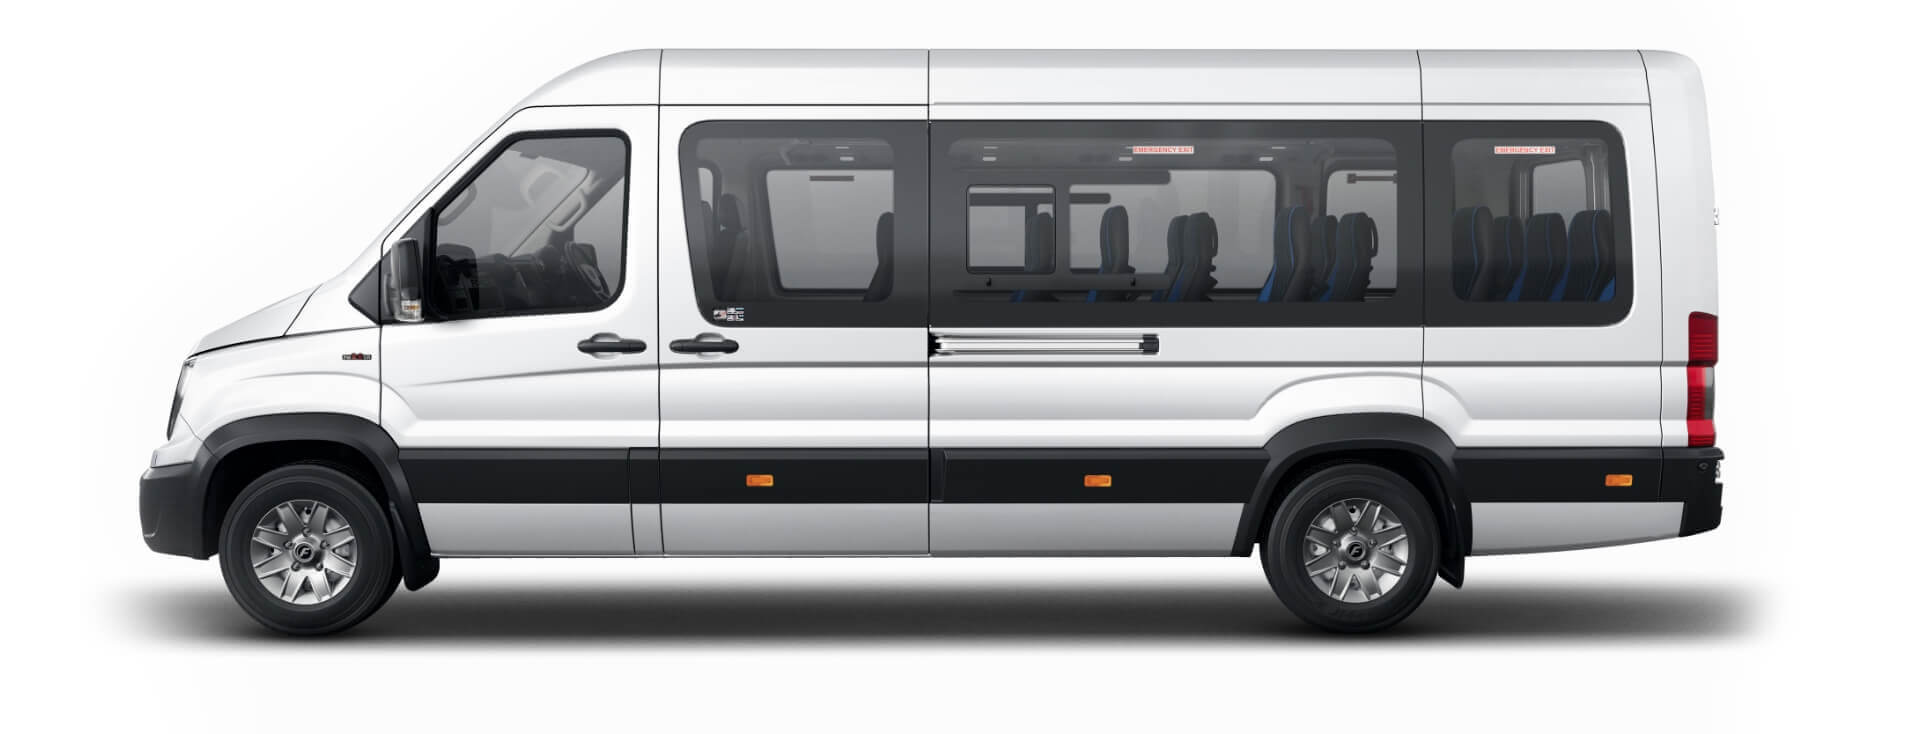 force tempo traveller new model price